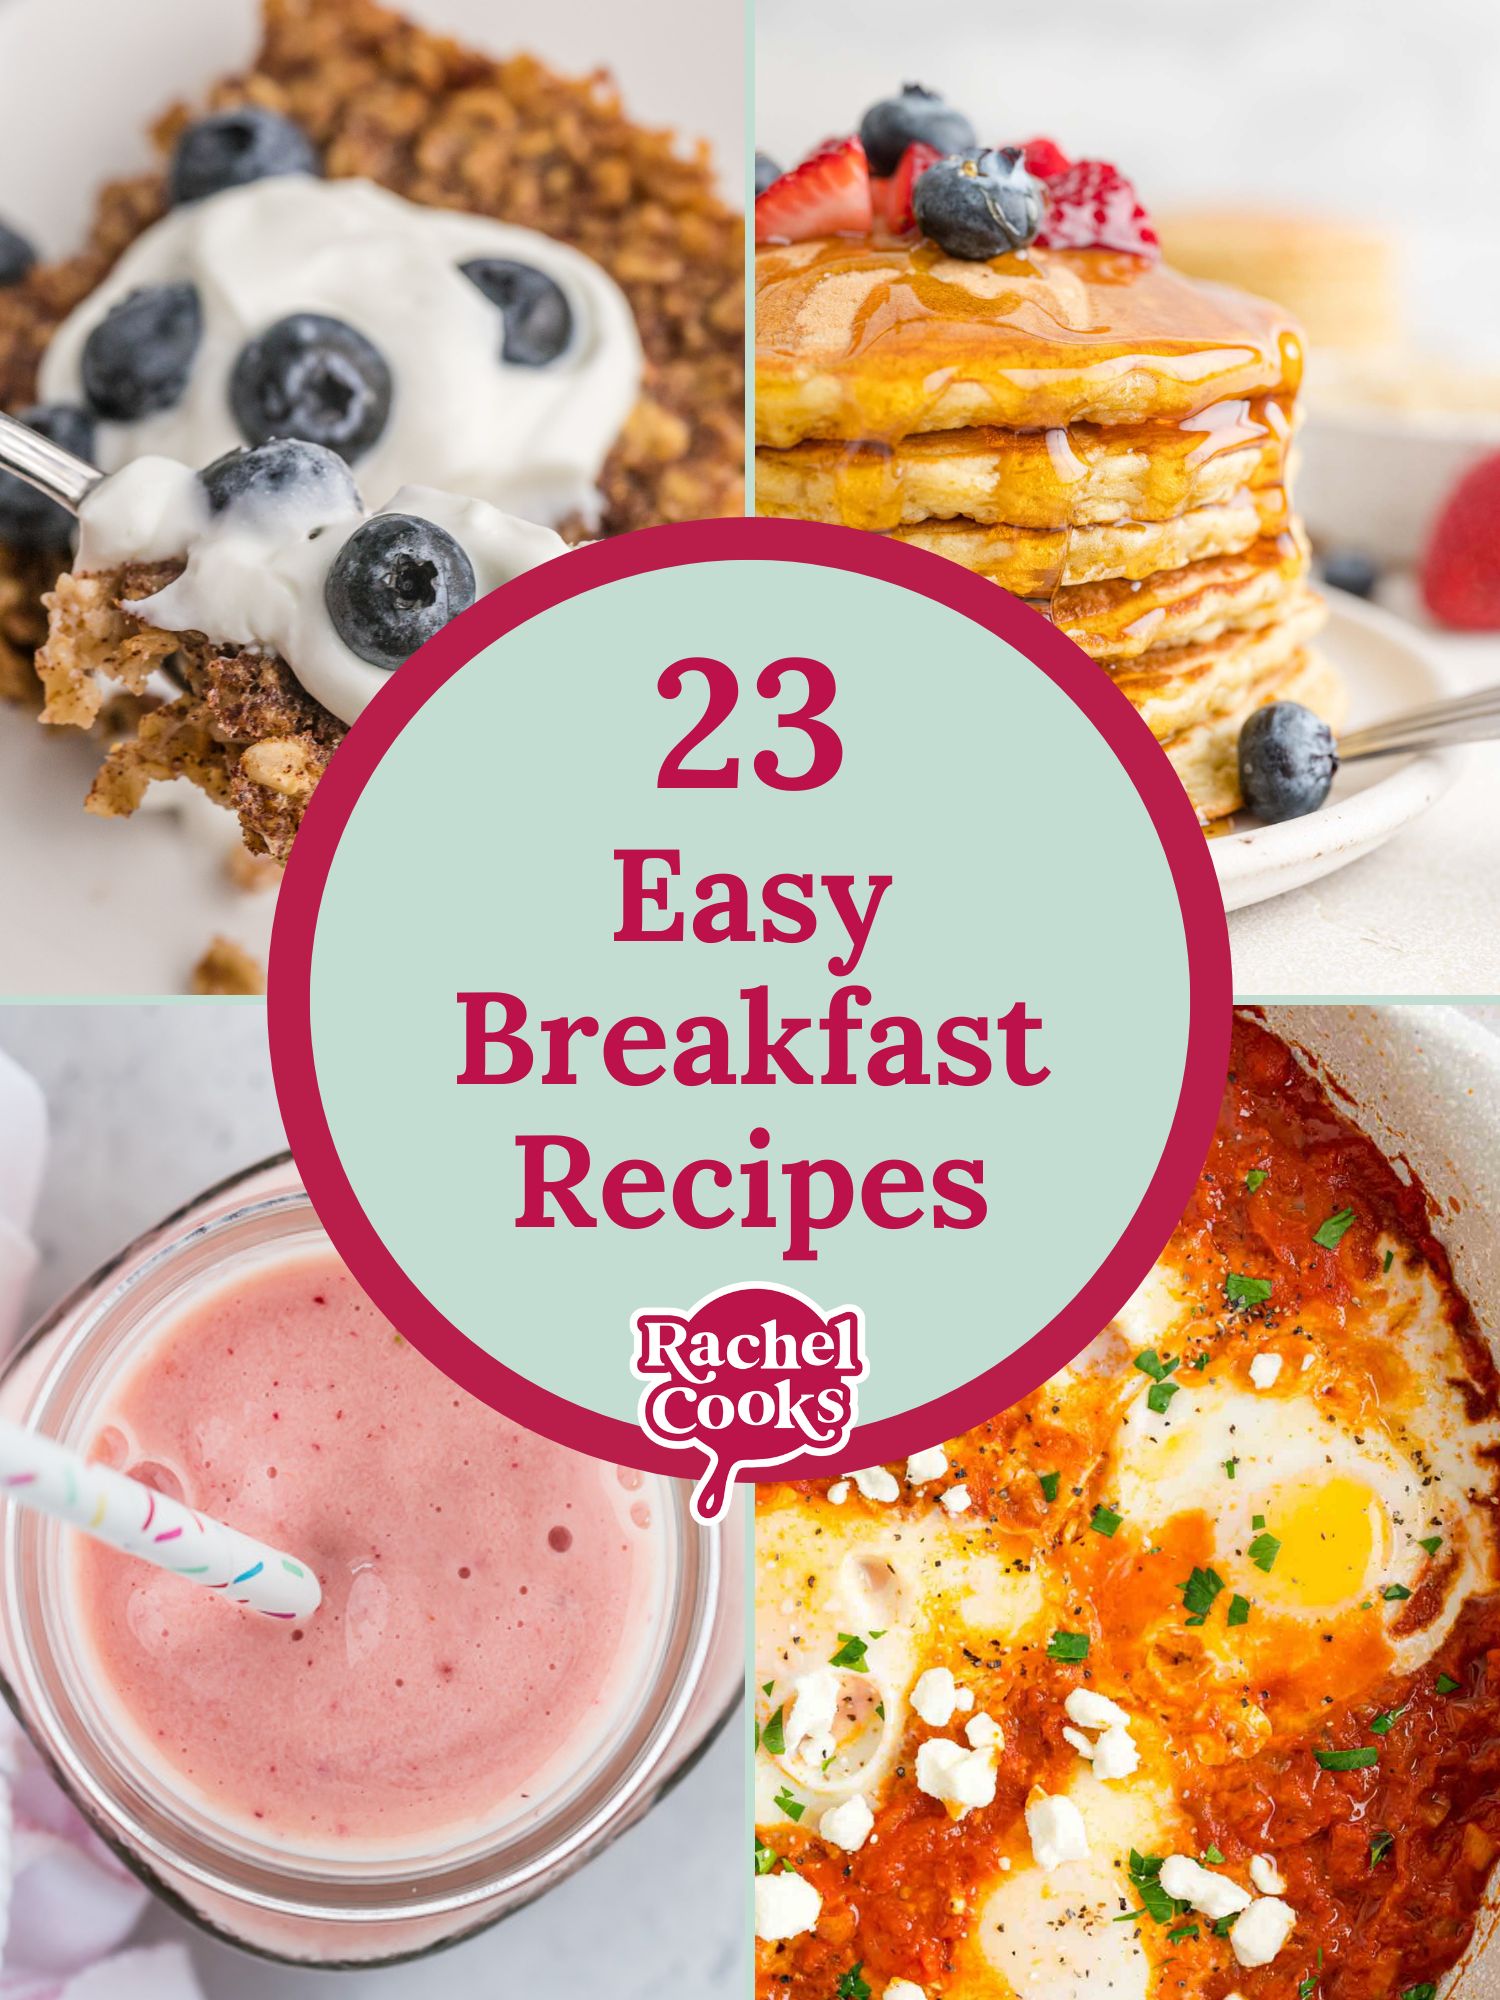 Easy Breakfast recipes graphic with text and photos of recipes.